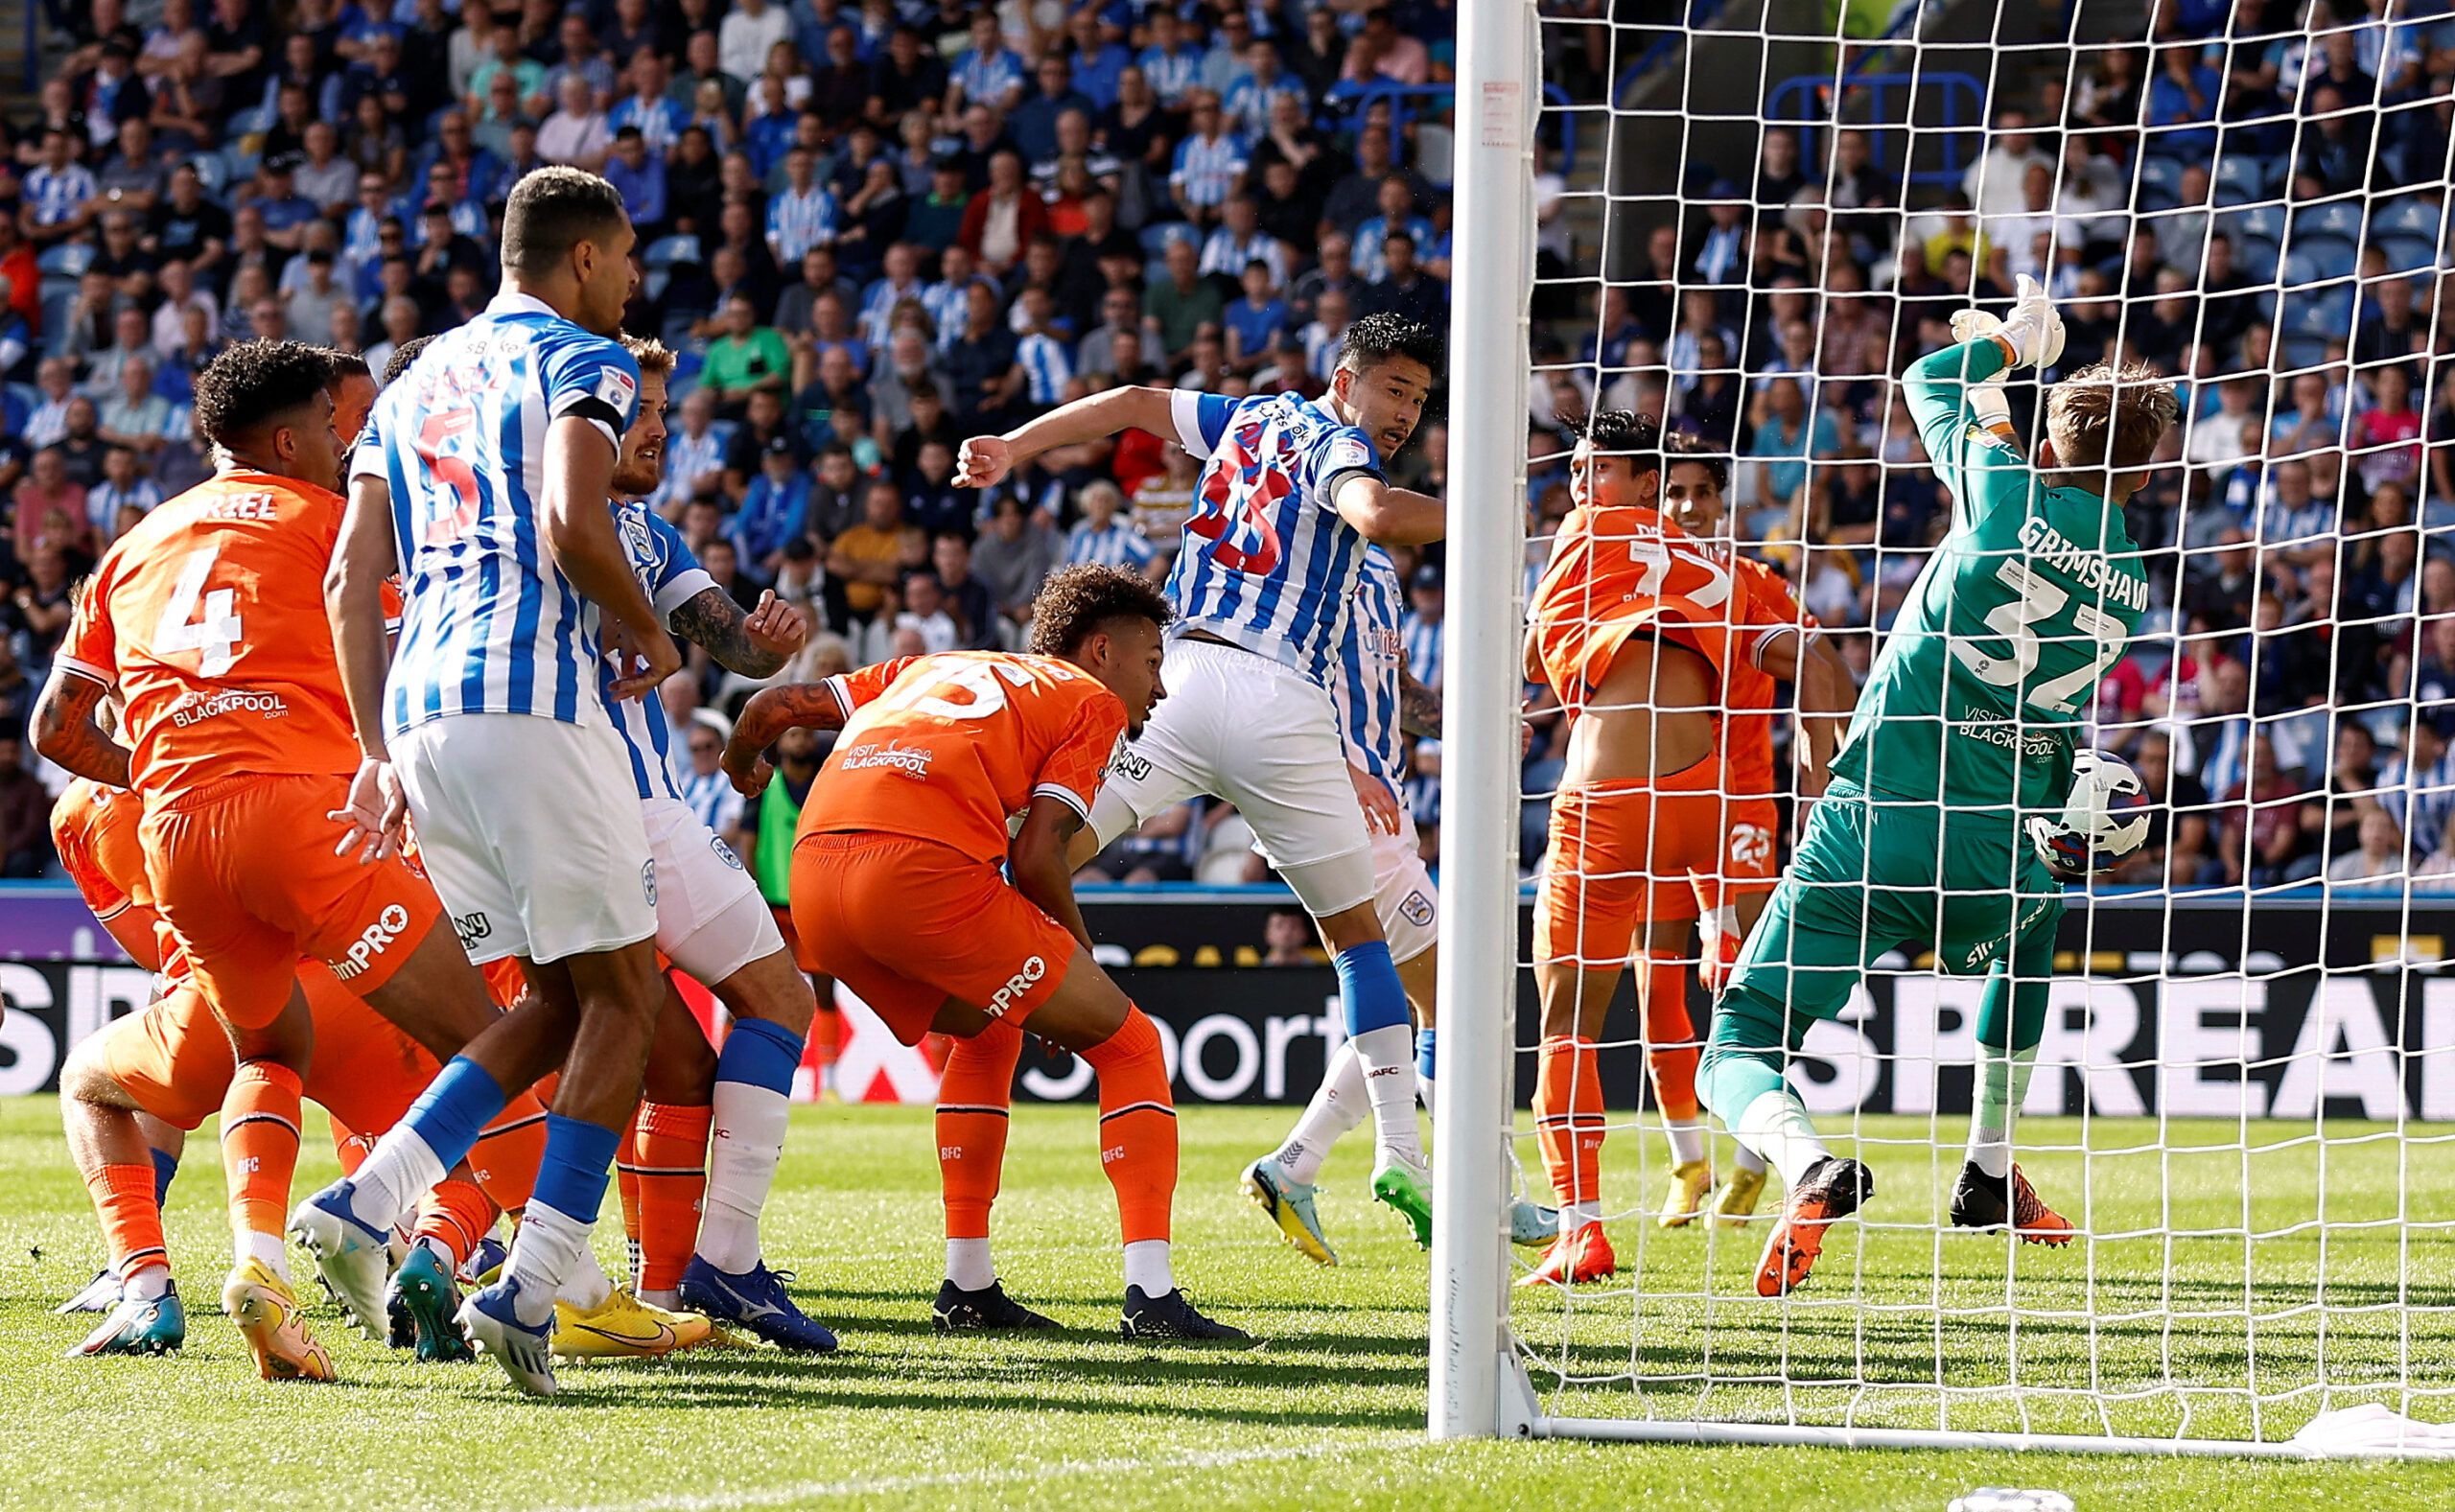 Soccer Football - Championship - Huddersfield Town v Blackpool - John Smith's Stadium, Huddersfield, Britain - September 4, 2022  Huddersfield Town's Yuta Nakayama heads at goal  Action Images/Jason Cairnduff  EDITORIAL USE ONLY. No use with unauthorized audio, video, data, fixture lists, club/league logos or 